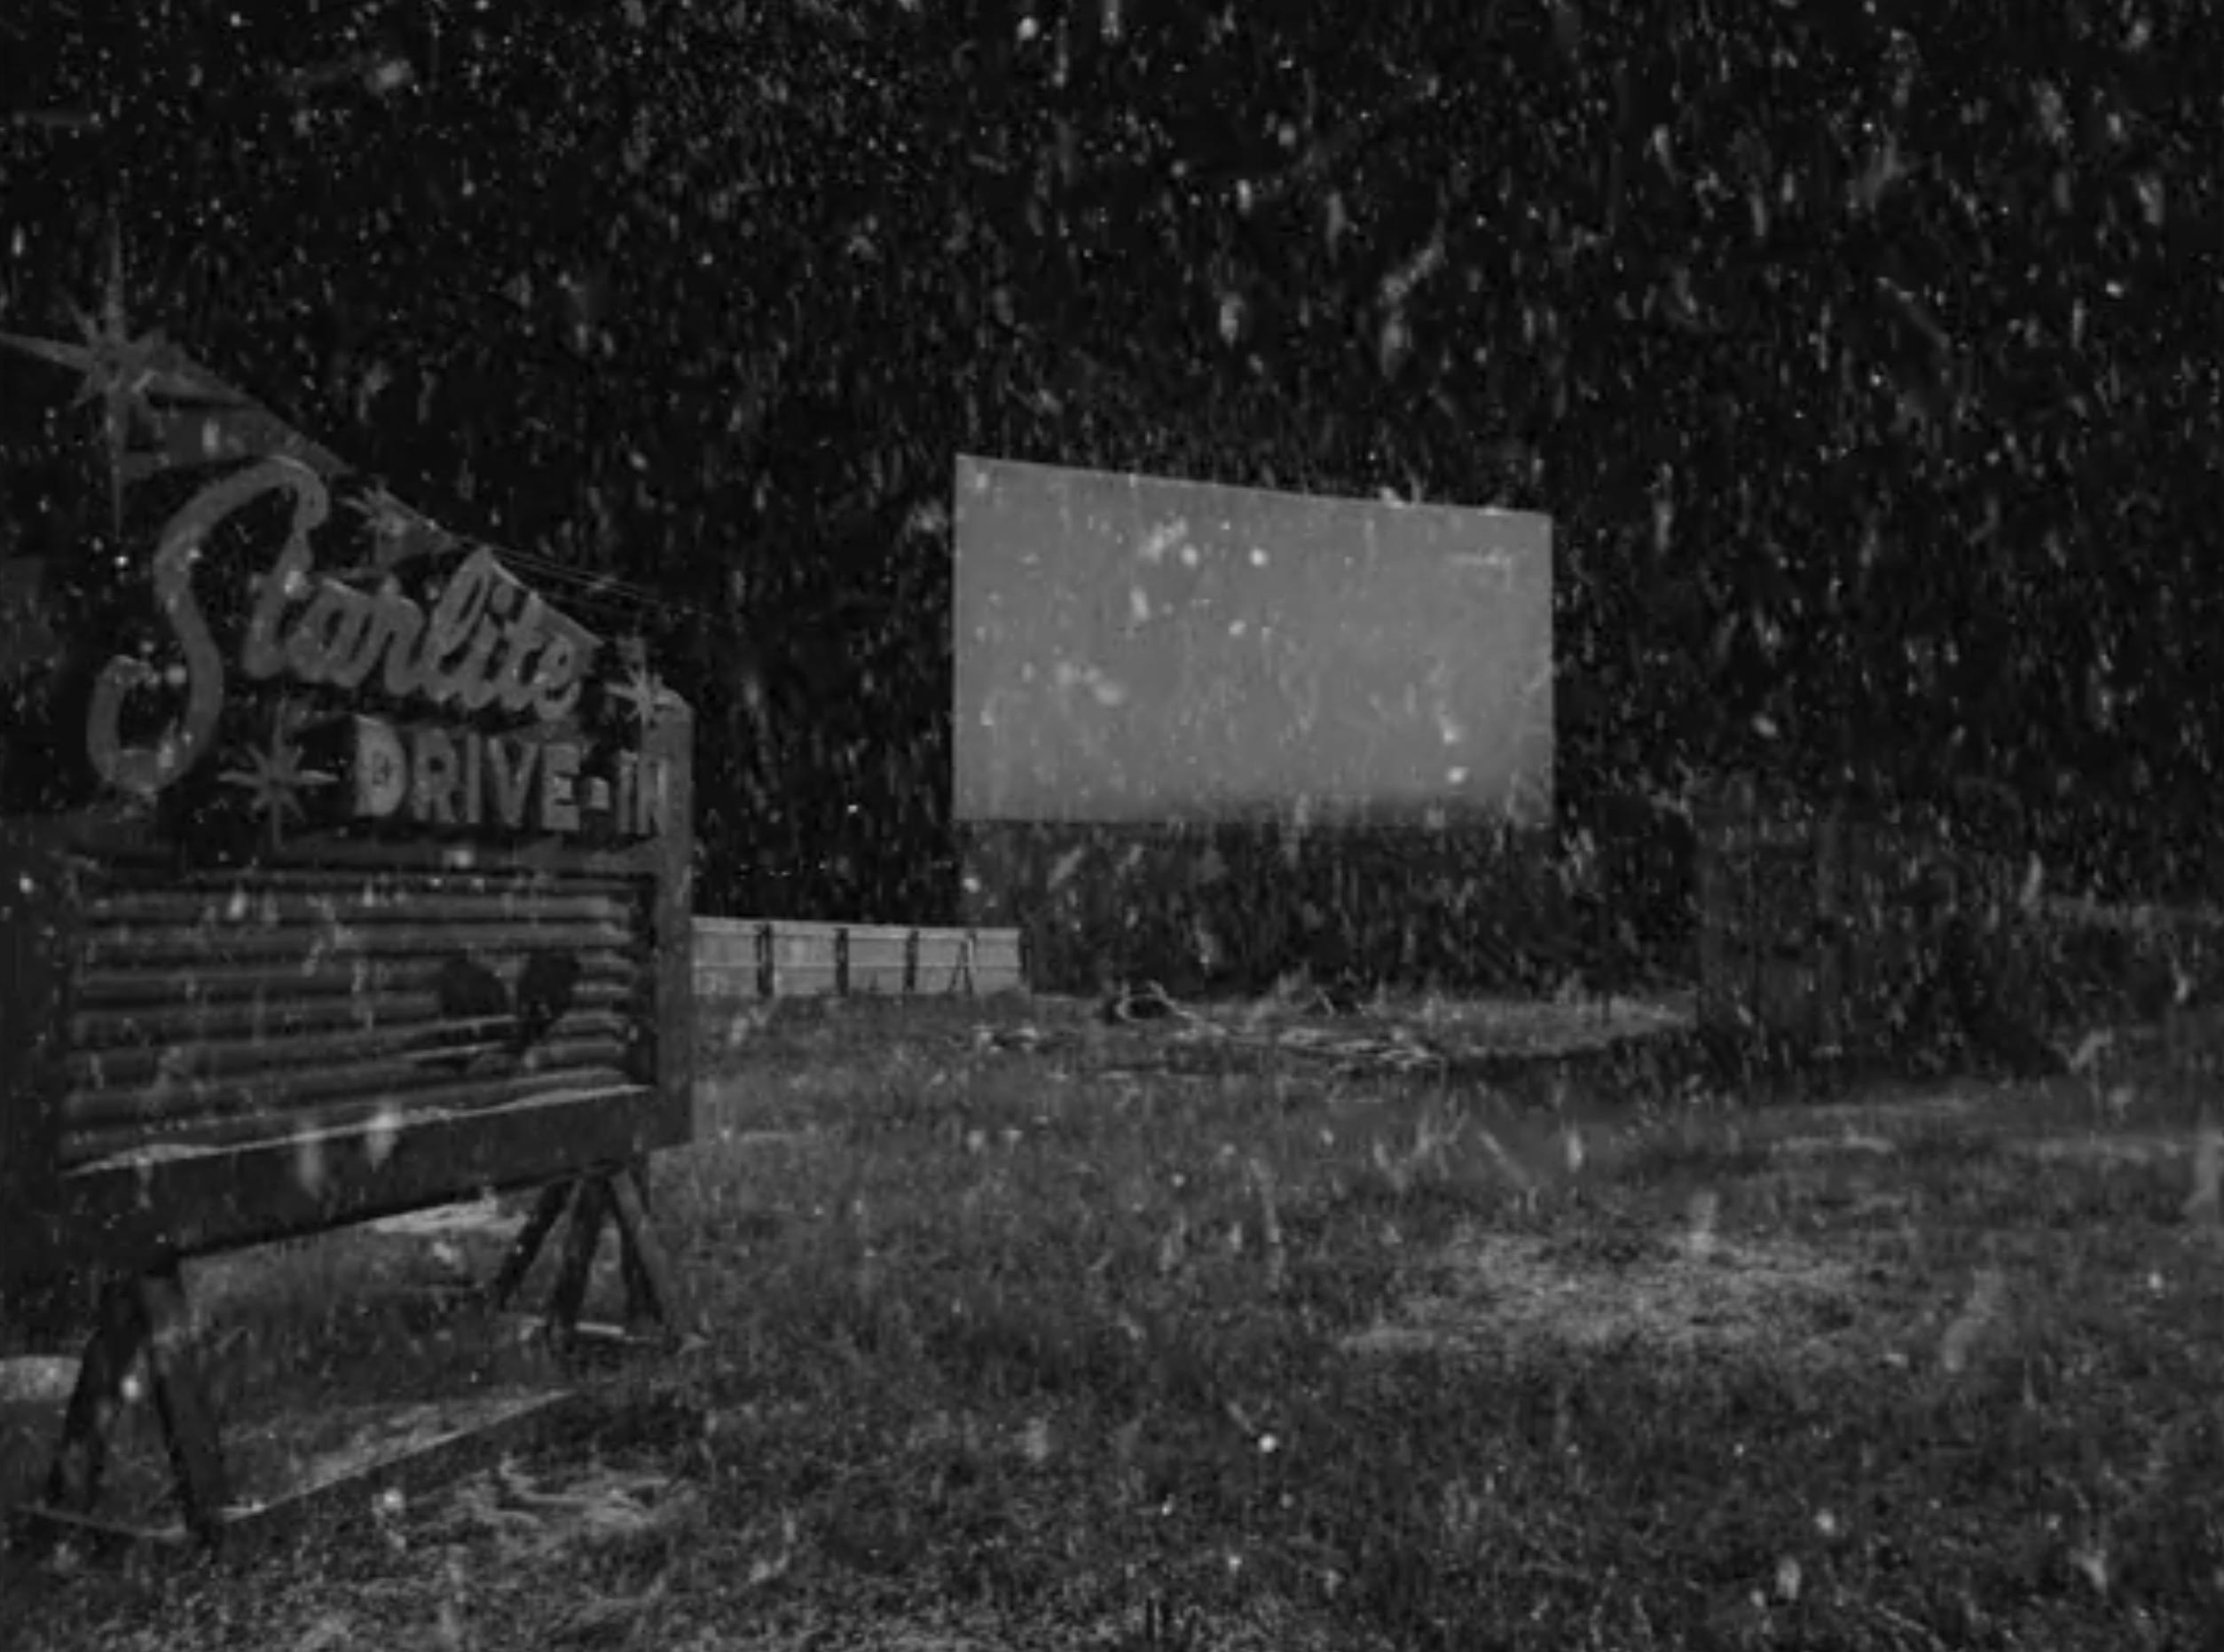 A black and white image of a snowy drive-in movie theater